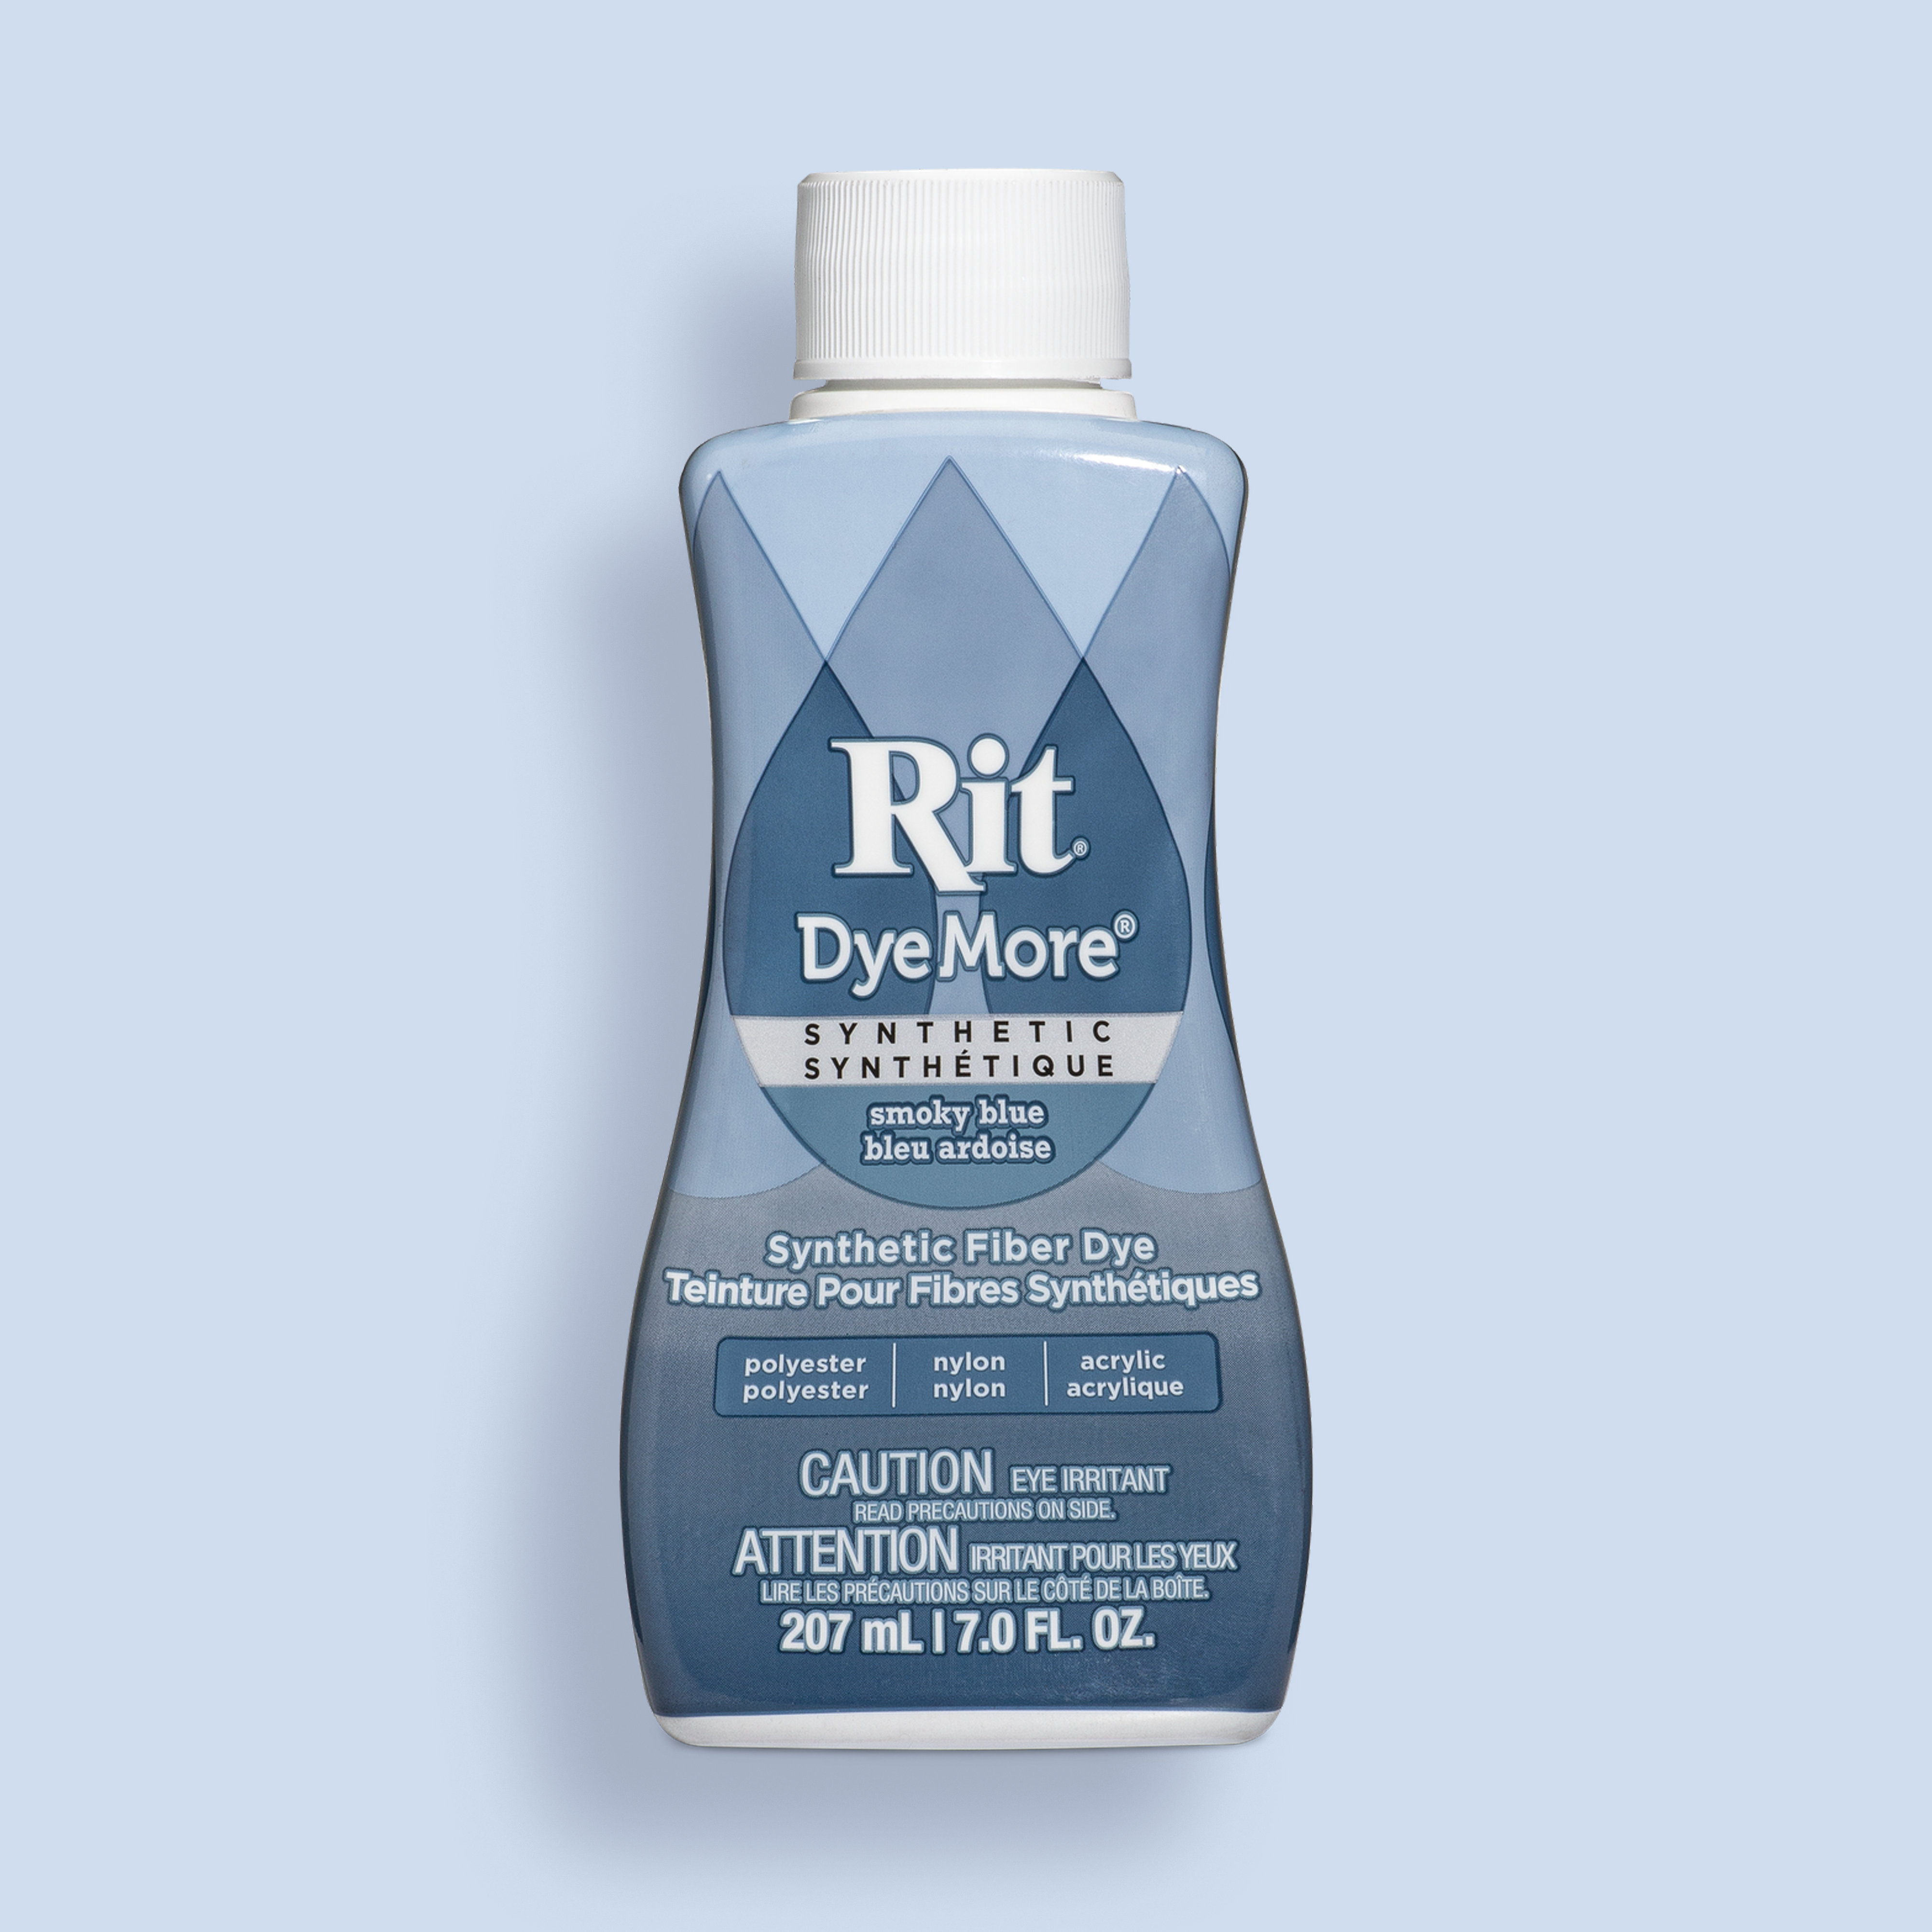 Rit DyeMore Liquid Dye for Synthetic Fibers - Smoky Blue - 207 ml